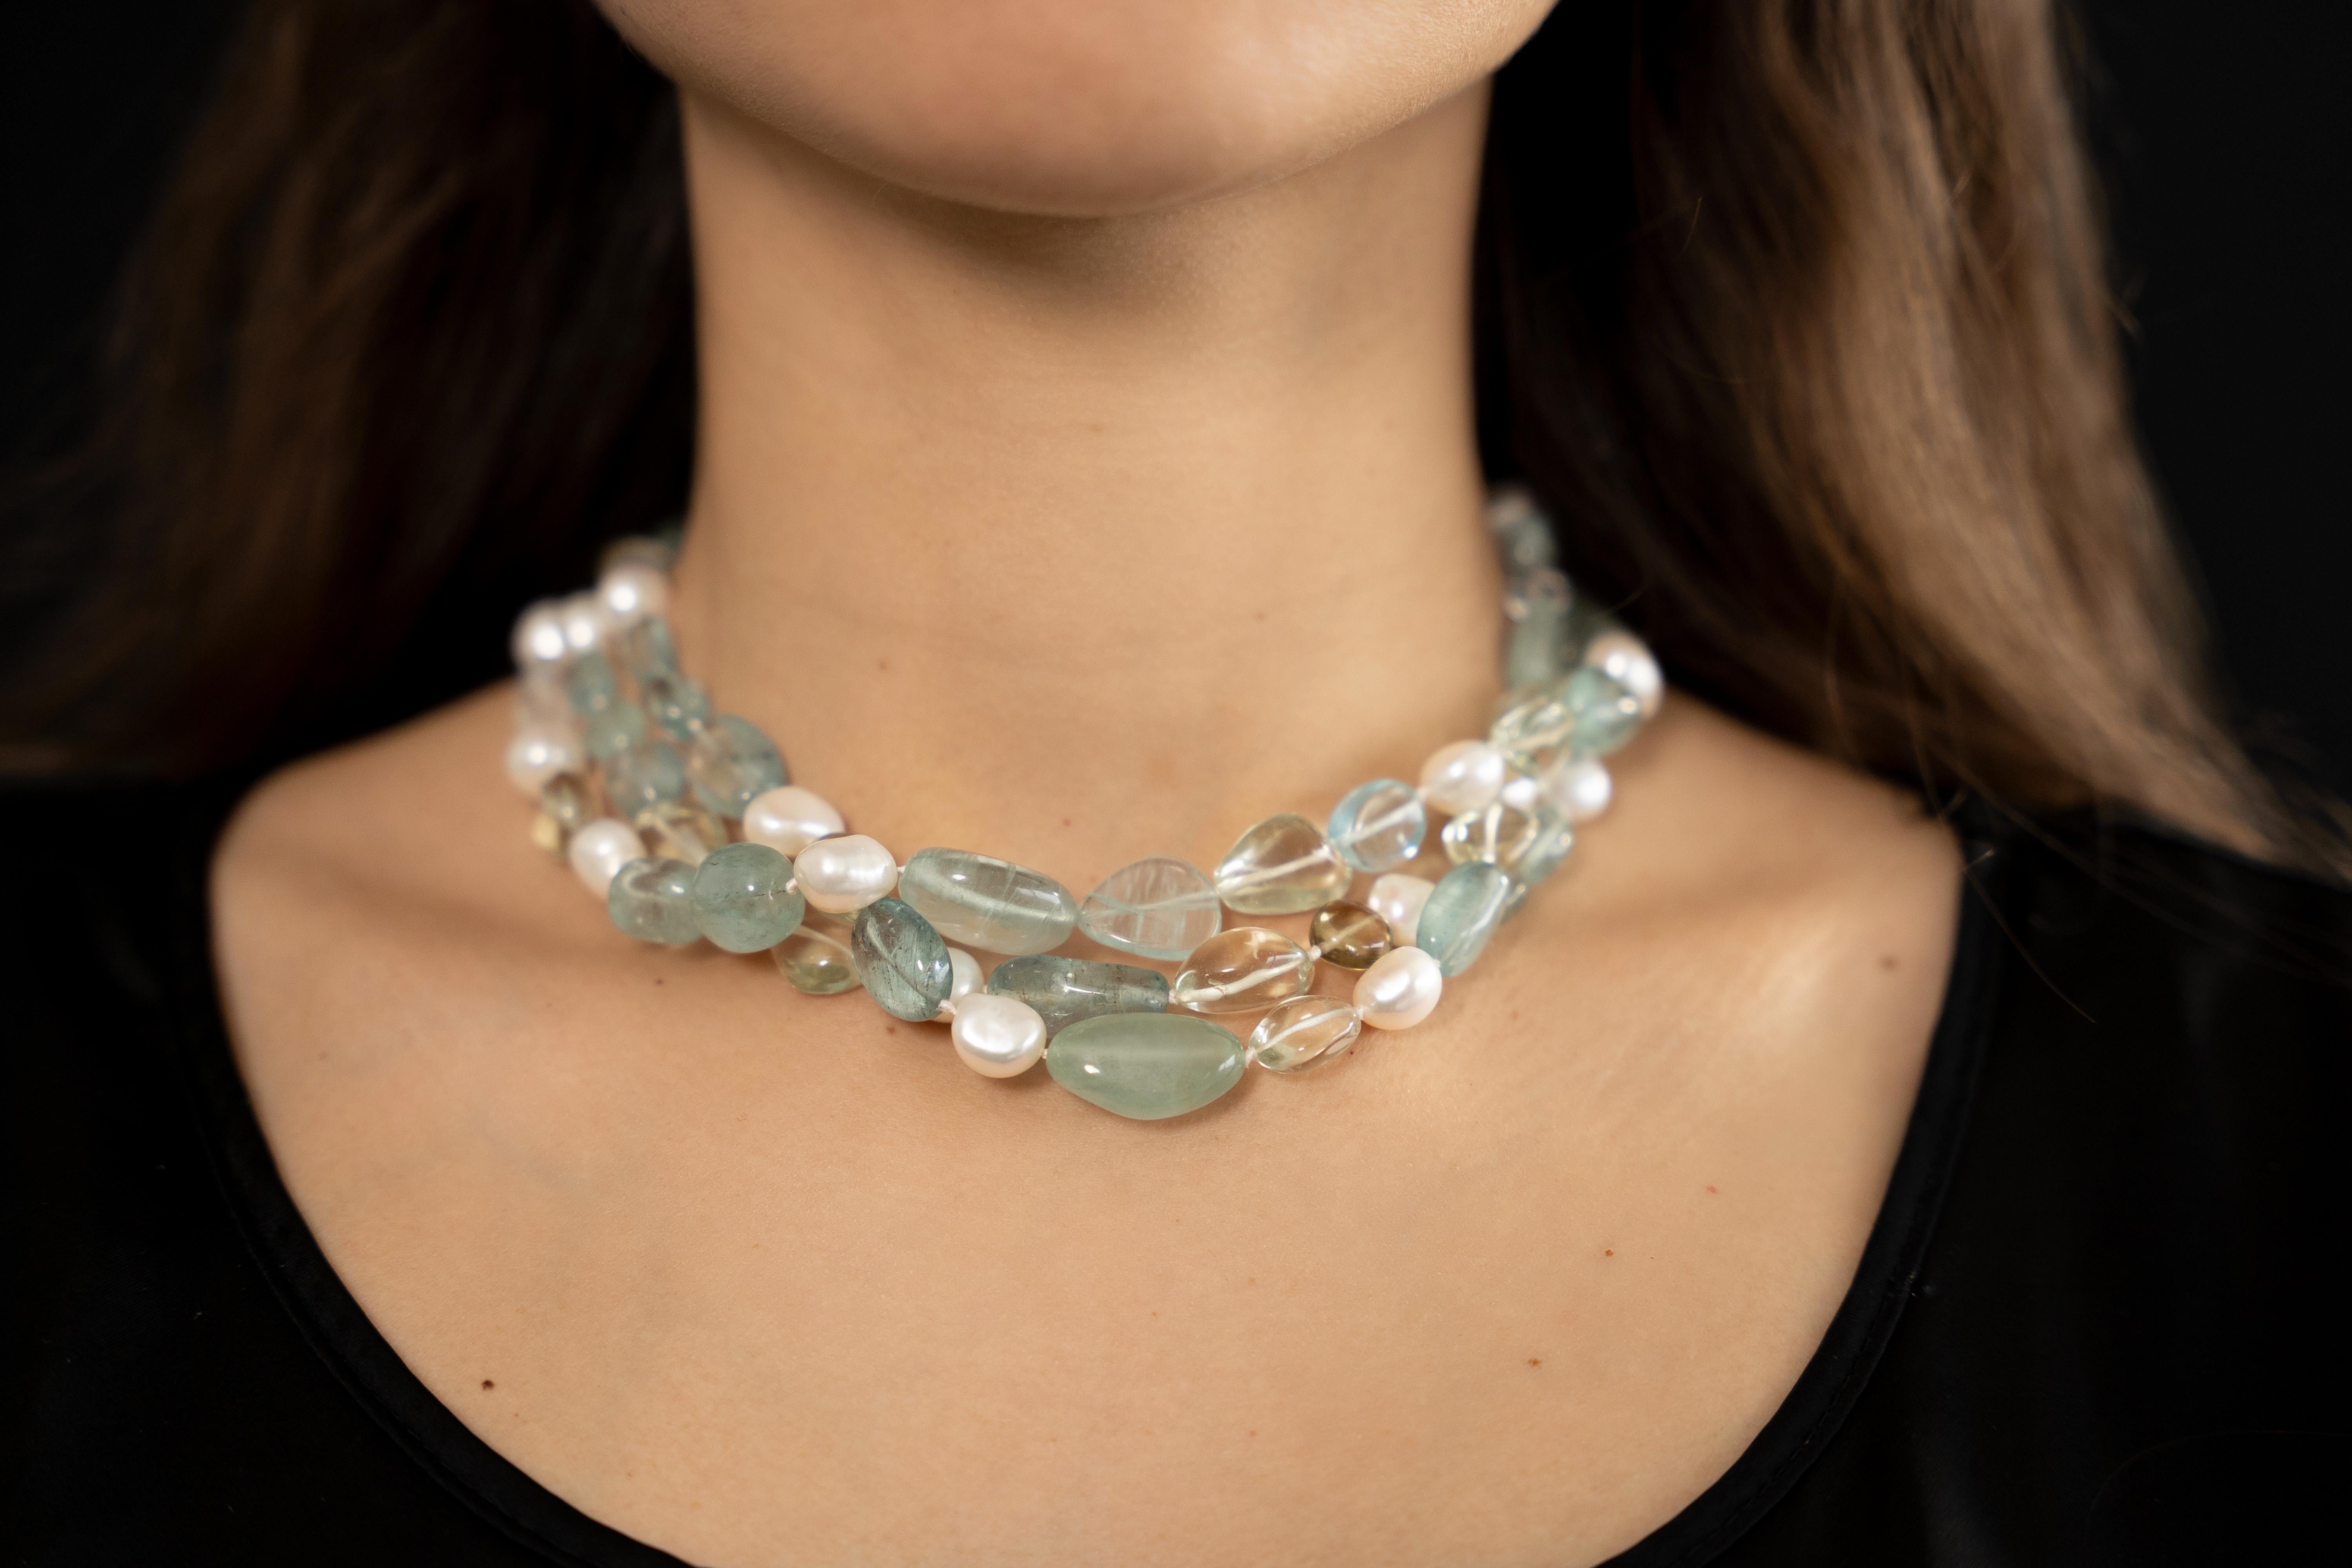 An unique creation by Marion Jeantet.
This necklace is a choker. It's composed of fresh water pearls and aquamarine tumbled.
To attach it, a strong magnet surrounded by wood.
Necklace total weight : 135,76 g
24 fresh water pearls
Aquamarine tumbled